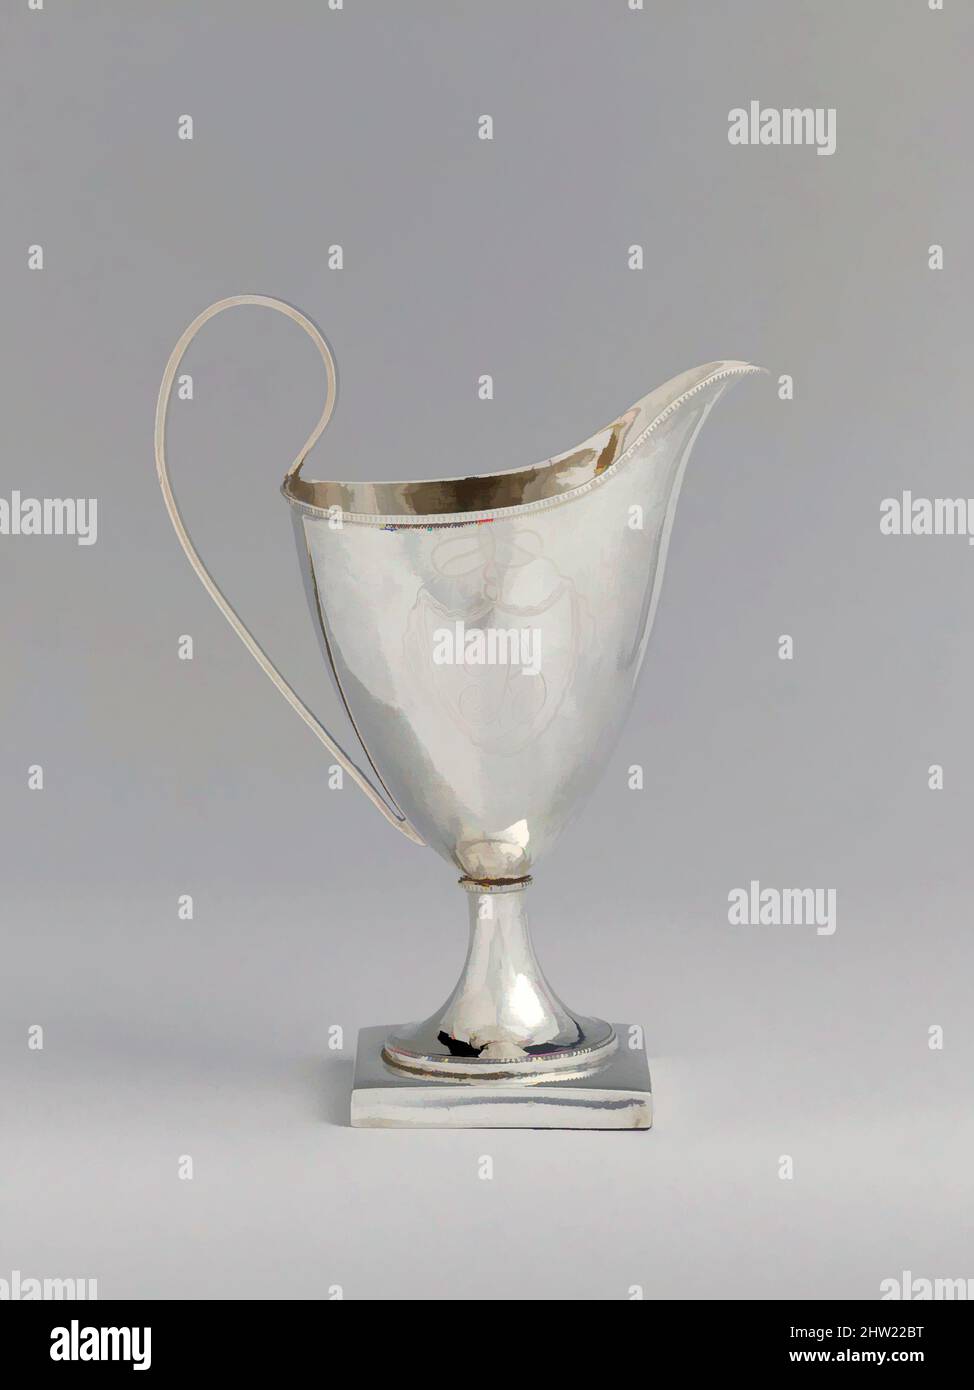 Art inspired by Creamer, ca. 1795, Made in Alexandria, Virginia, United States, American, Silver, Overall: 6 7/8 x 5 3/16 in. (17.5 x 13.2 cm); 6 oz. 18 dwt. (215 g), Silver, Possibly James Adam (1755–1798) or, Possibly John Adam (1775–1848, Classic works modernized by Artotop with a splash of modernity. Shapes, color and value, eye-catching visual impact on art. Emotions through freedom of artworks in a contemporary way. A timeless message pursuing a wildly creative new direction. Artists turning to the digital medium and creating the Artotop NFT Stock Photo